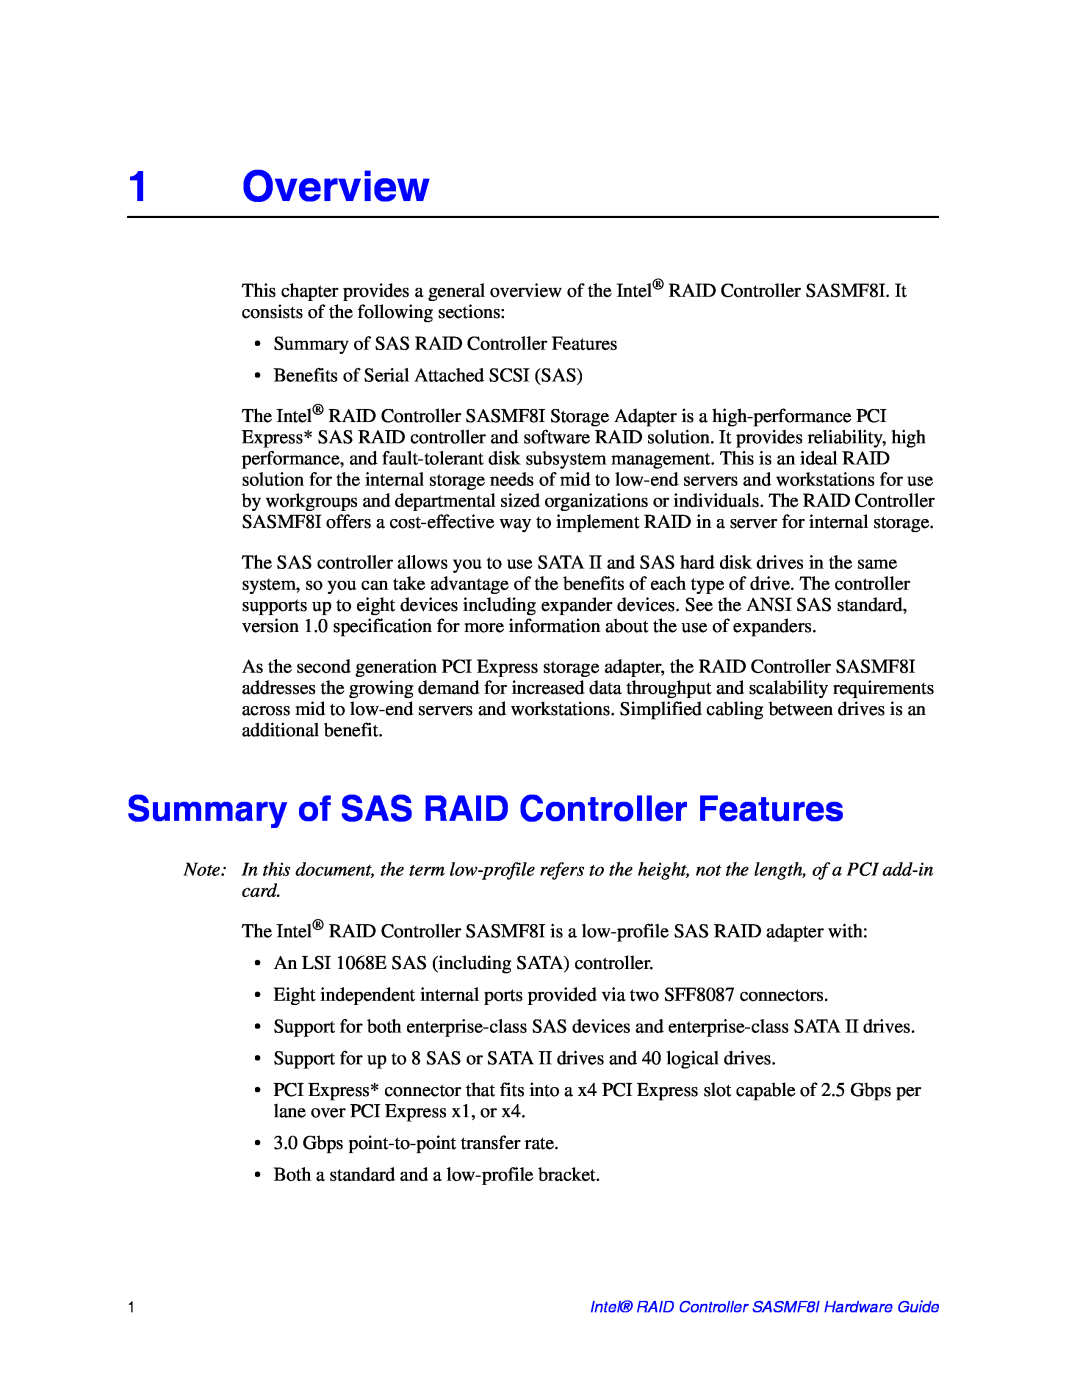 Intel SASMF8I manual Overview, Summary of SAS RAID Controller Features 